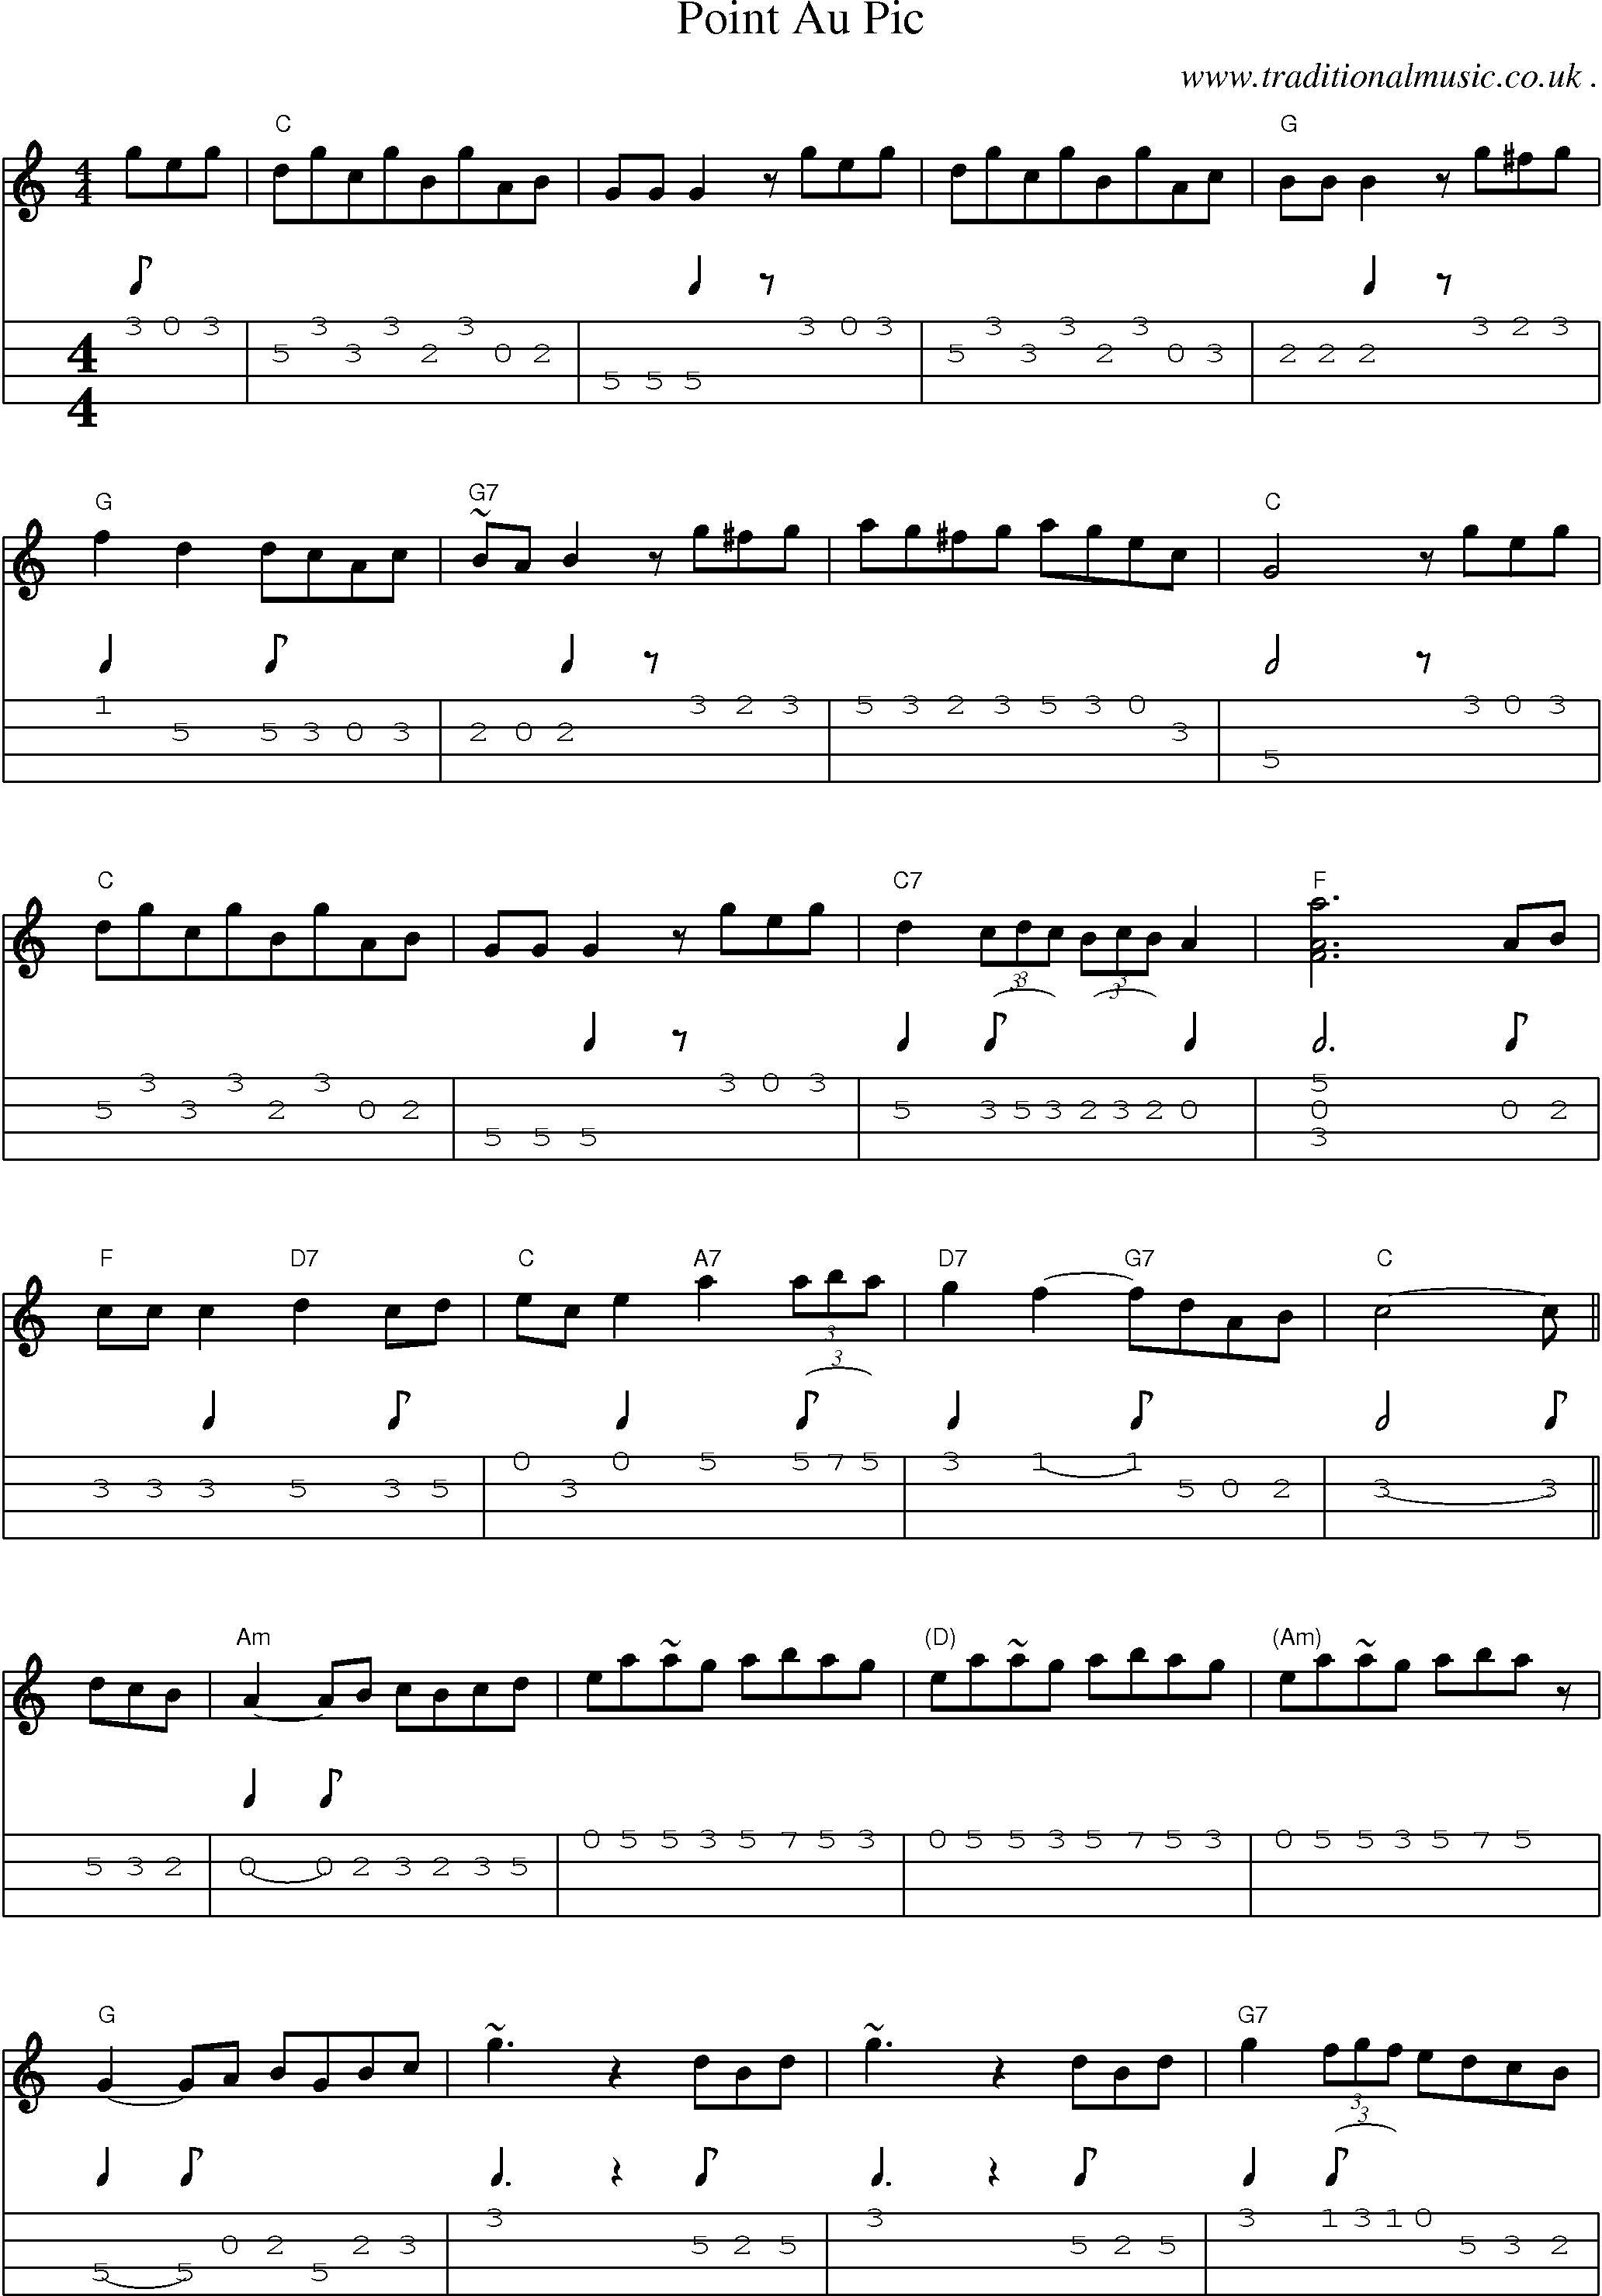 Music Score and Guitar Tabs for Point Au Pic